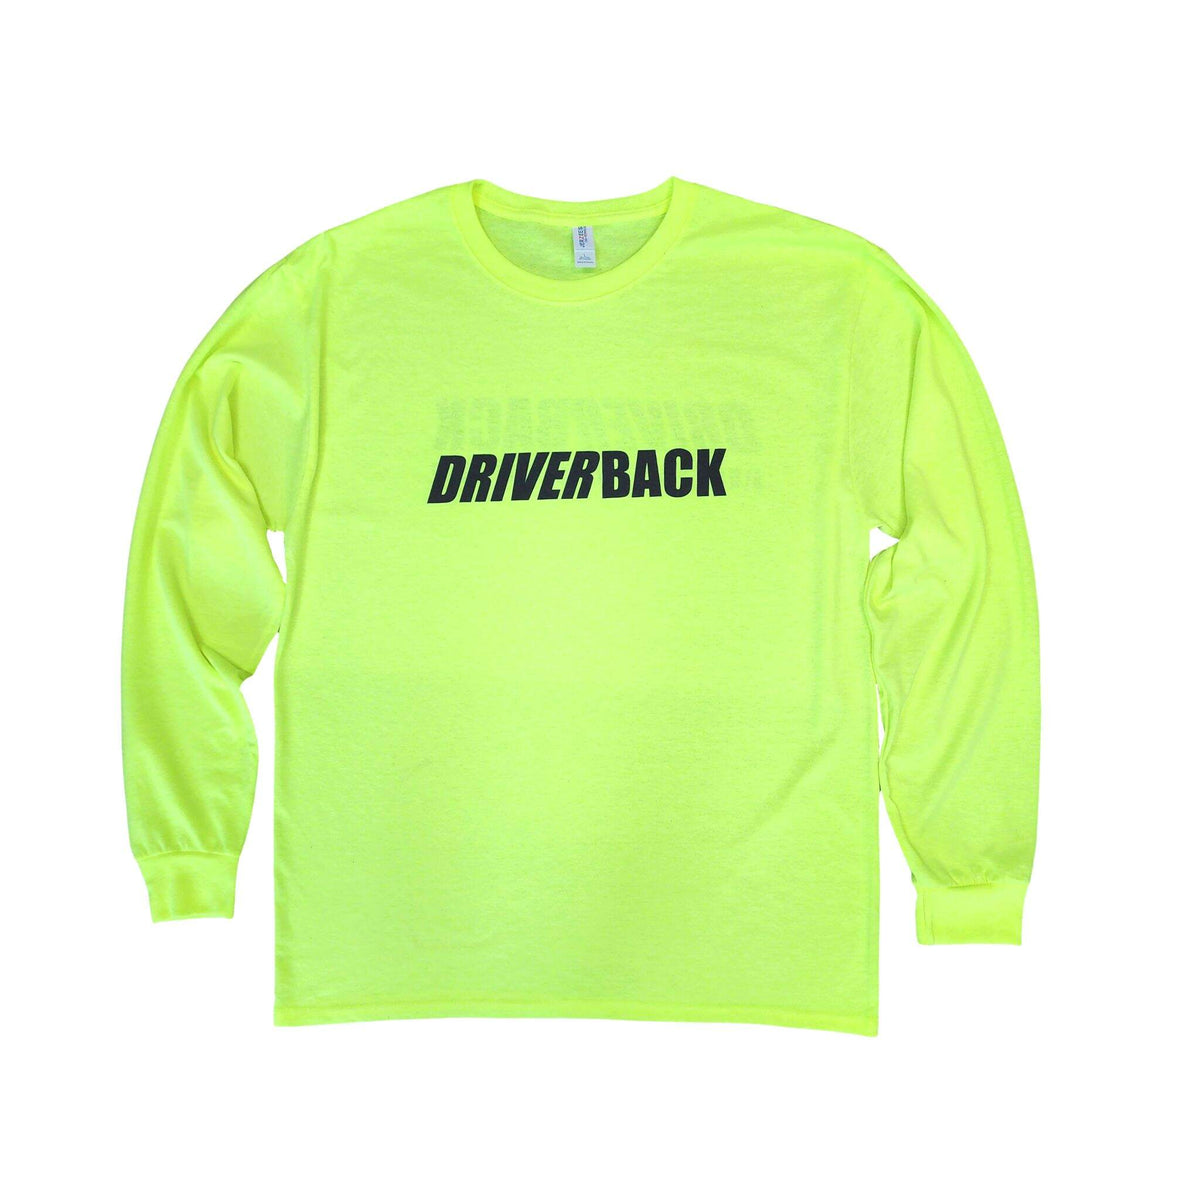 Safety Yellow Long Sleeve Cotton Shirt Front View